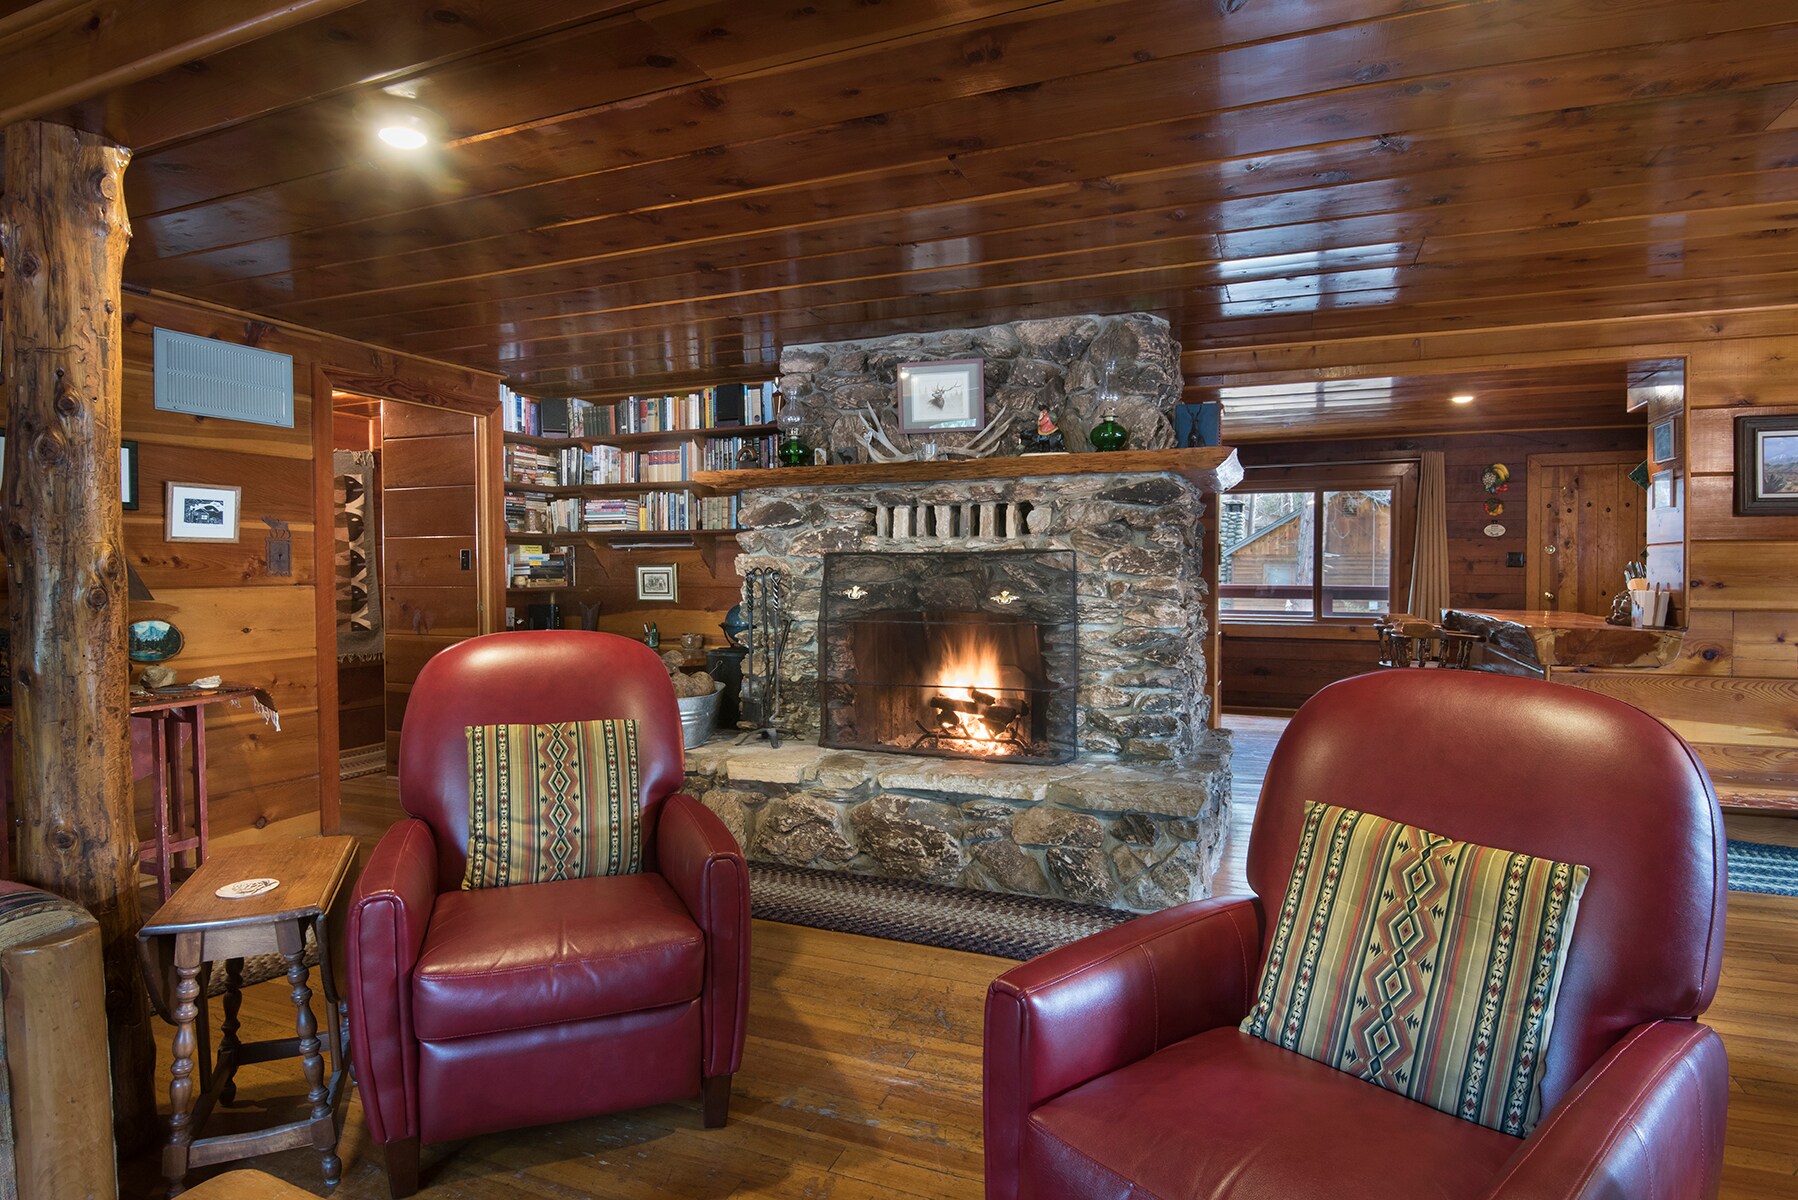 Relax in the living room and warm yourself next to the river rock fireplace.